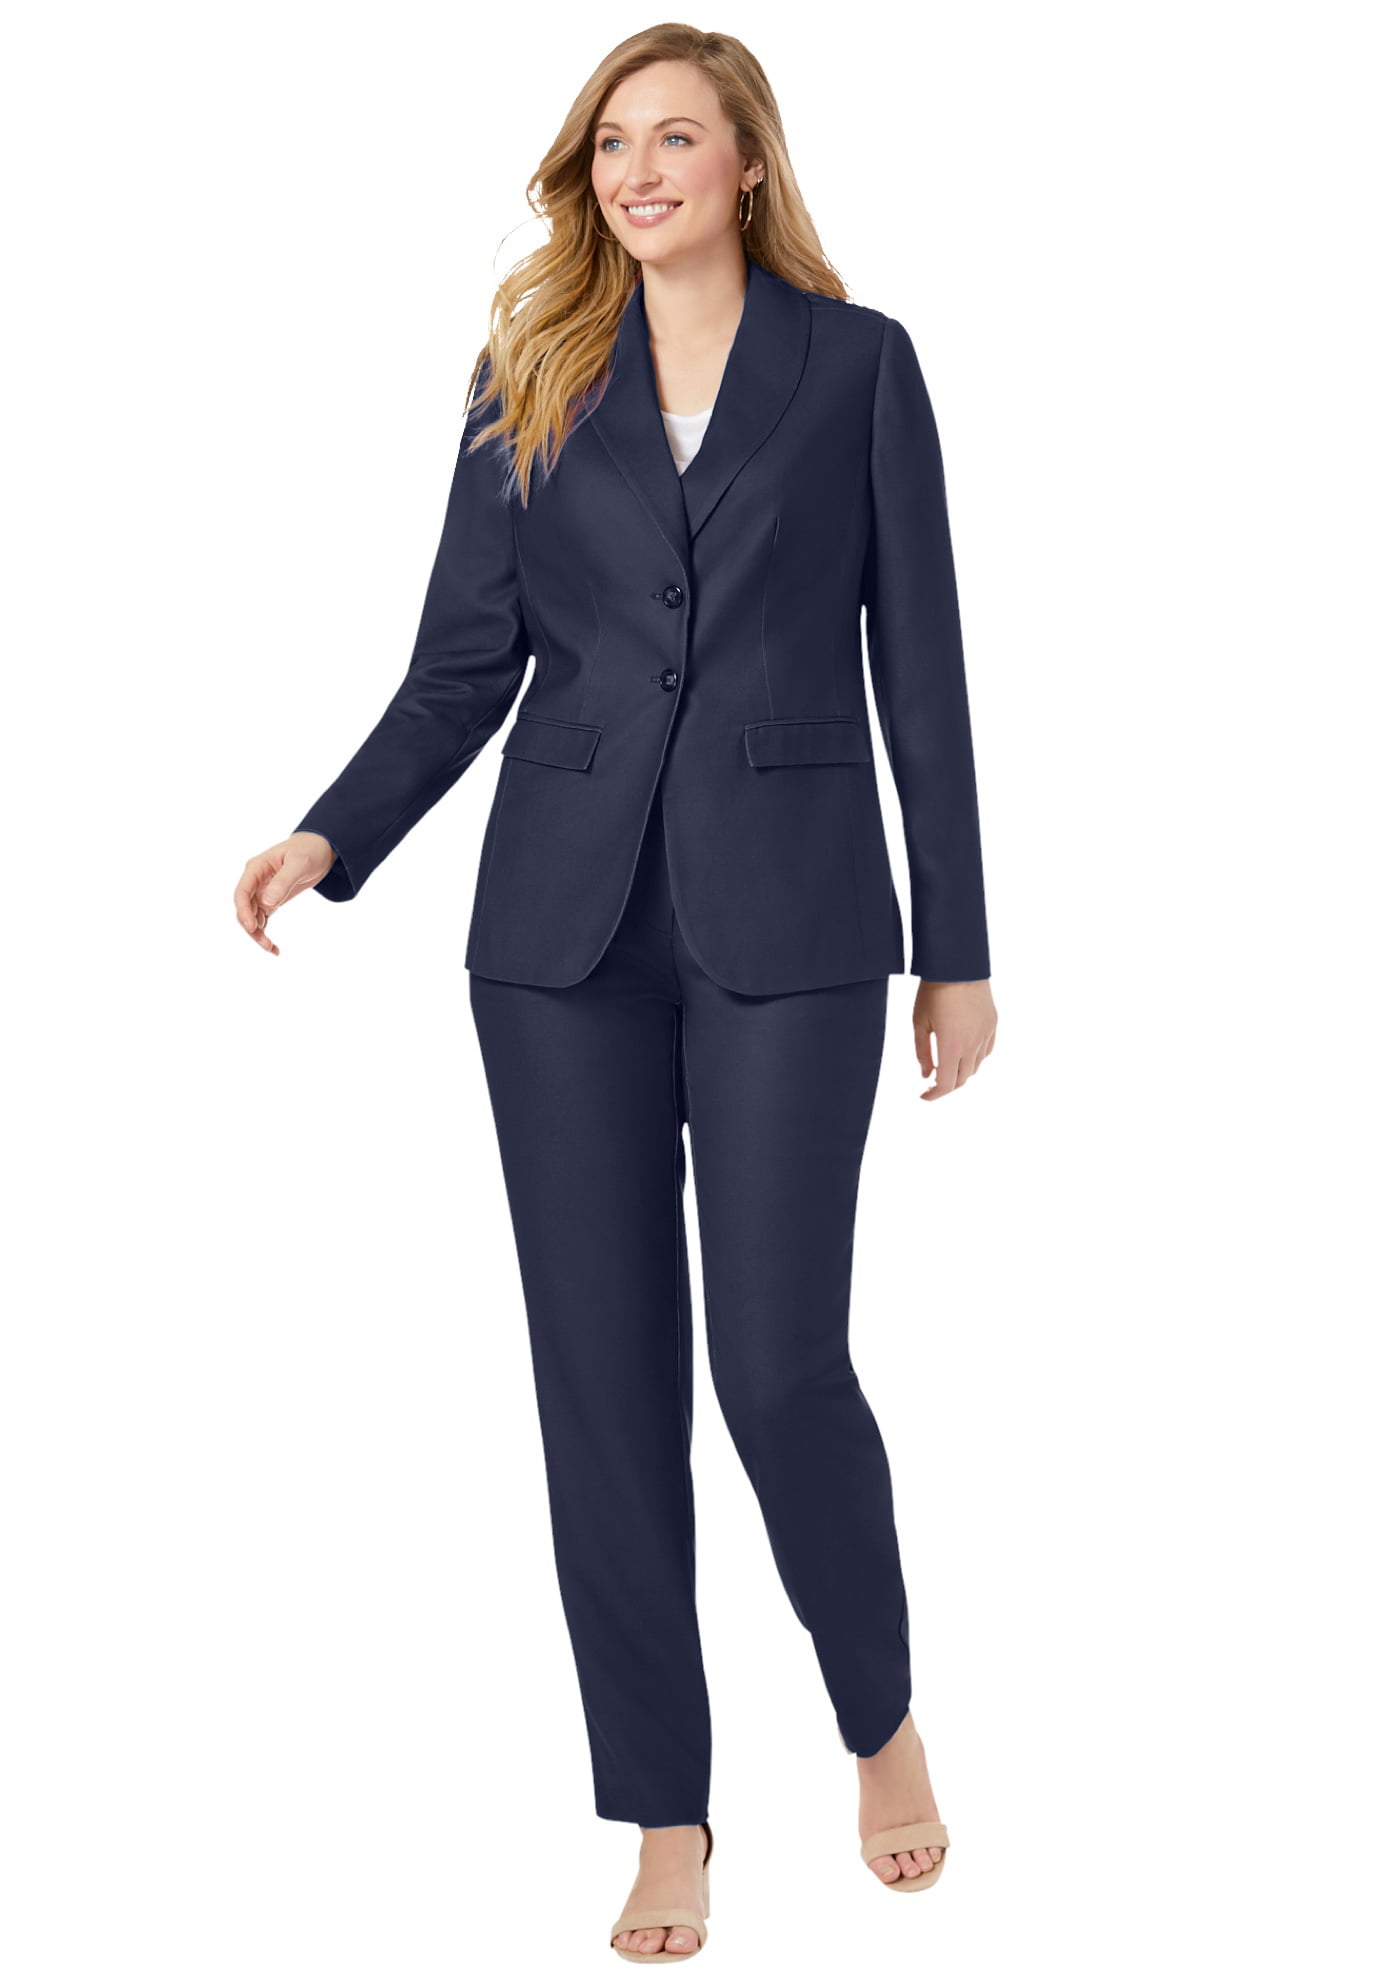 Jessica London Womens Plus Size Single-Breasted Pant Suit Set 